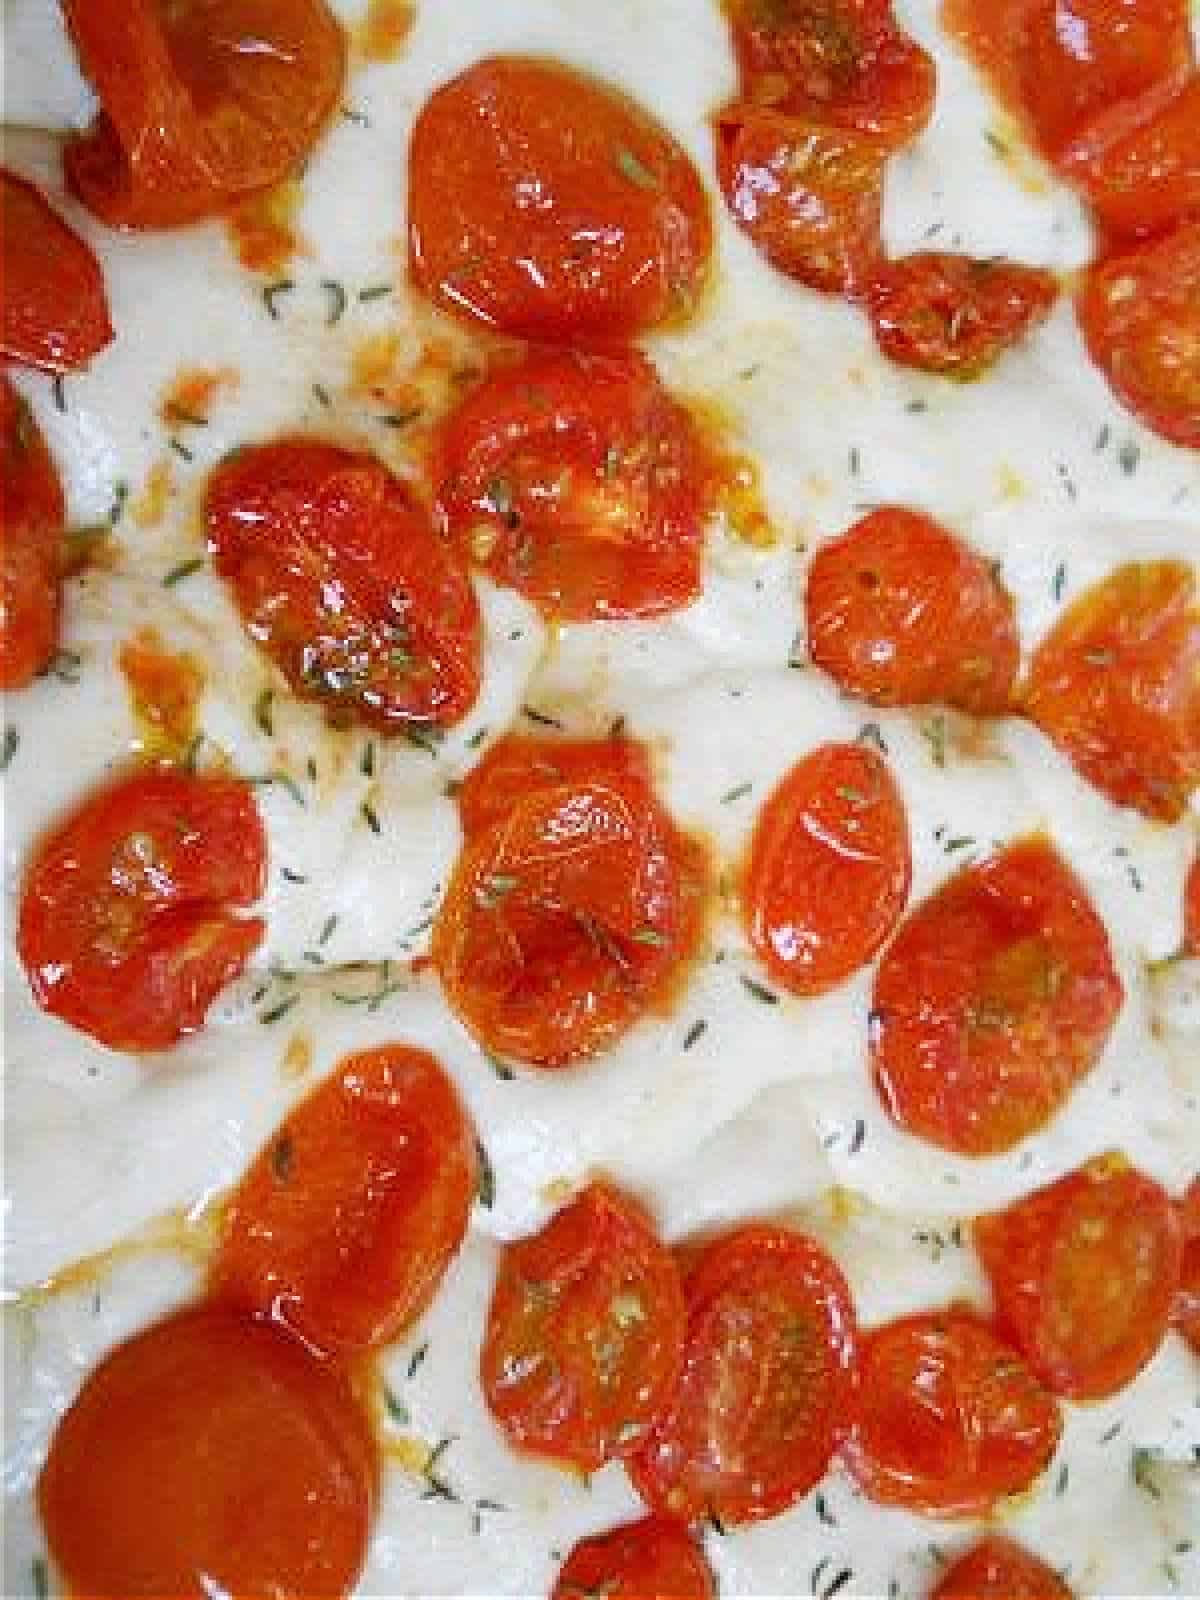 Raw bread dough with cherry tomatoes on top